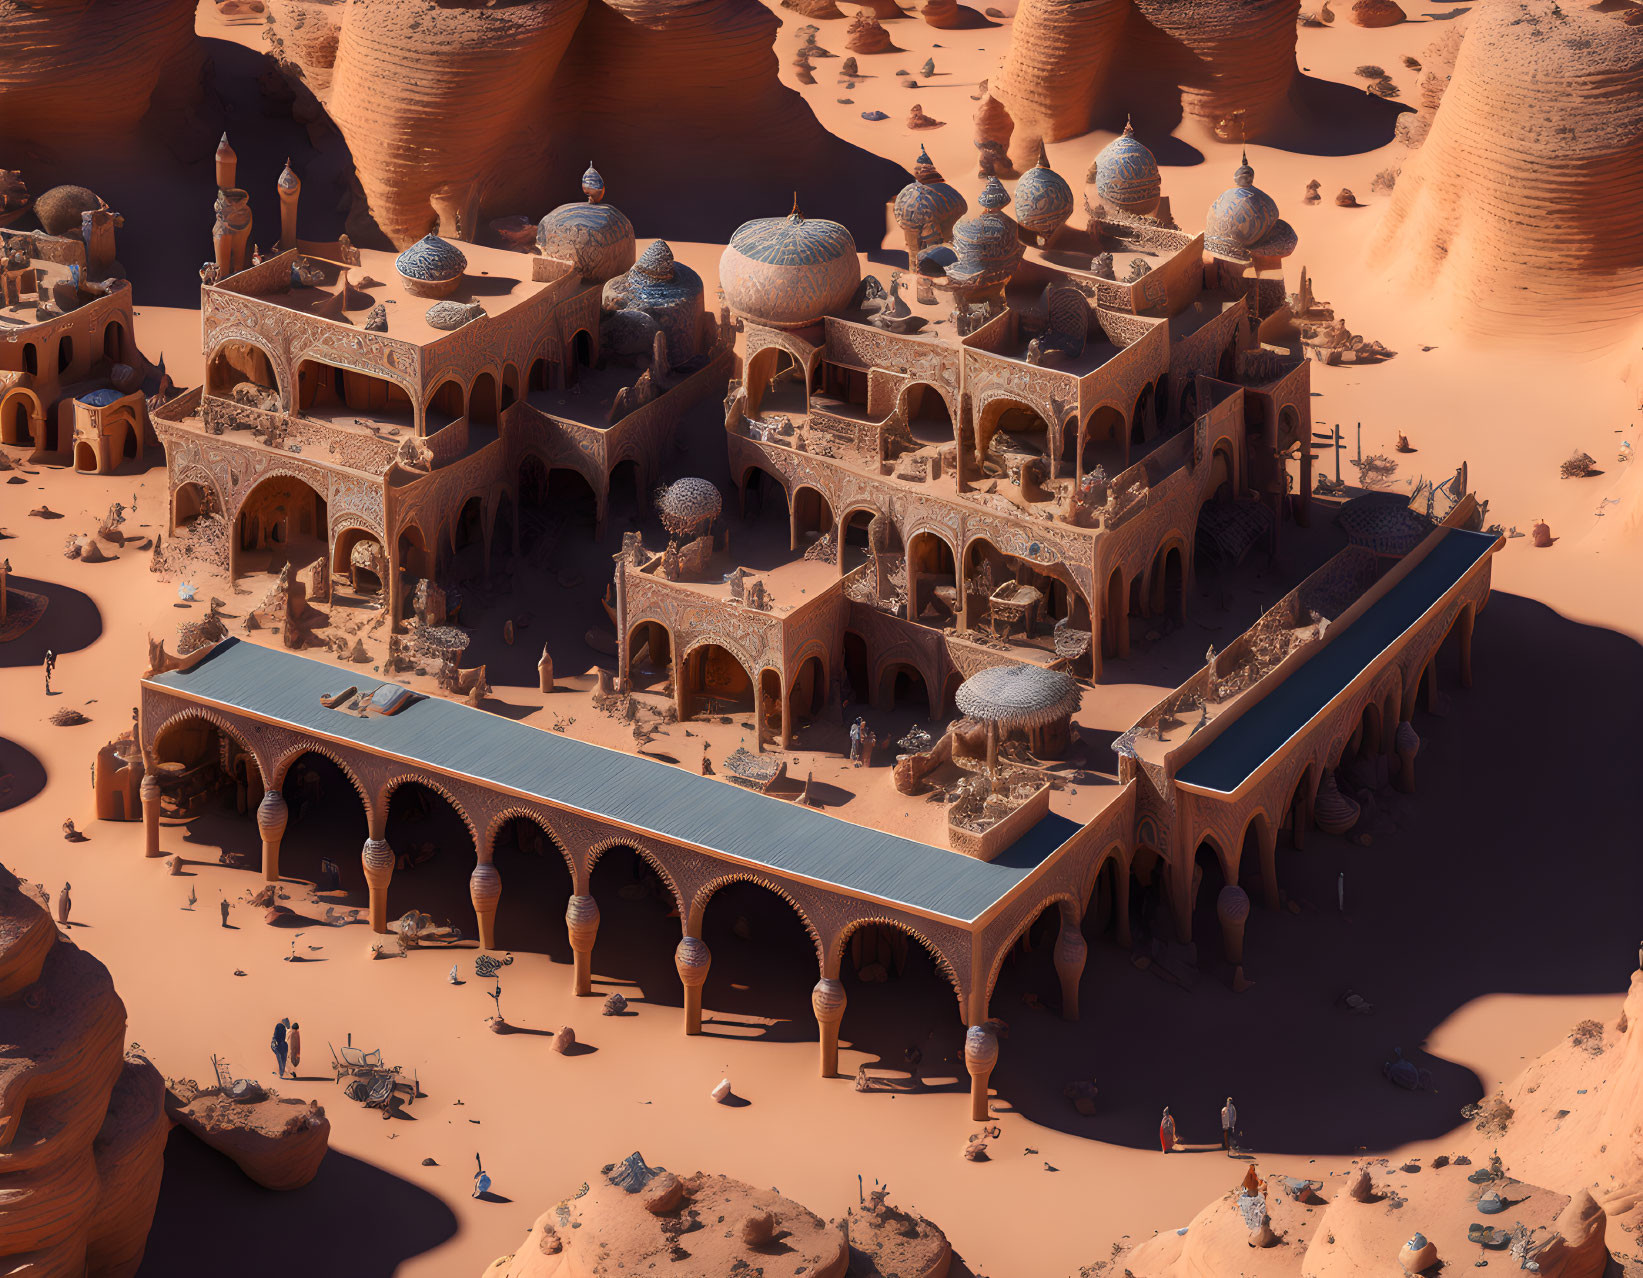 Desert city with domed buildings and sand dunes under clear sky